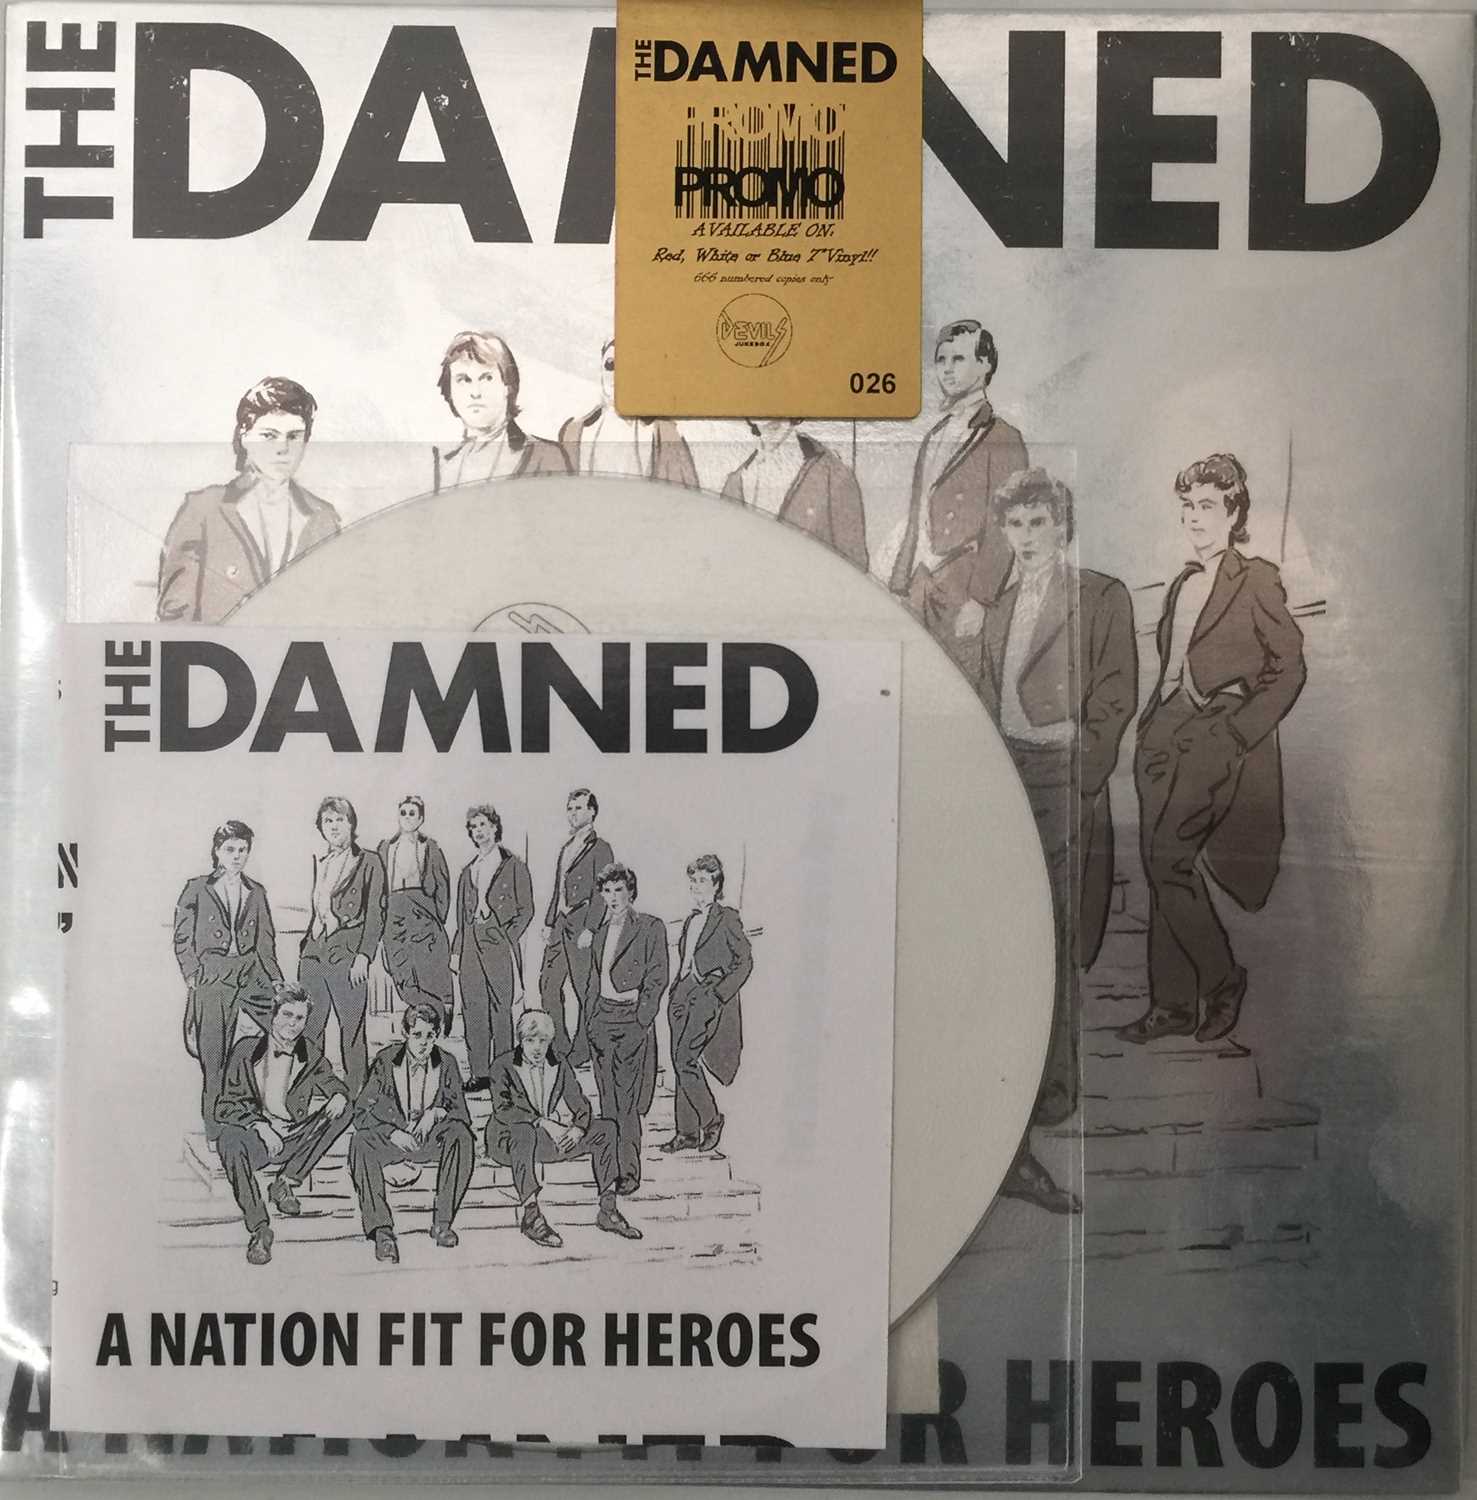 Lot 248 - THE DAMNED - A NATION FIT FOR HEROES 7" (3x 7" PROMO PRESS REVIEW PACK - DJB66644)